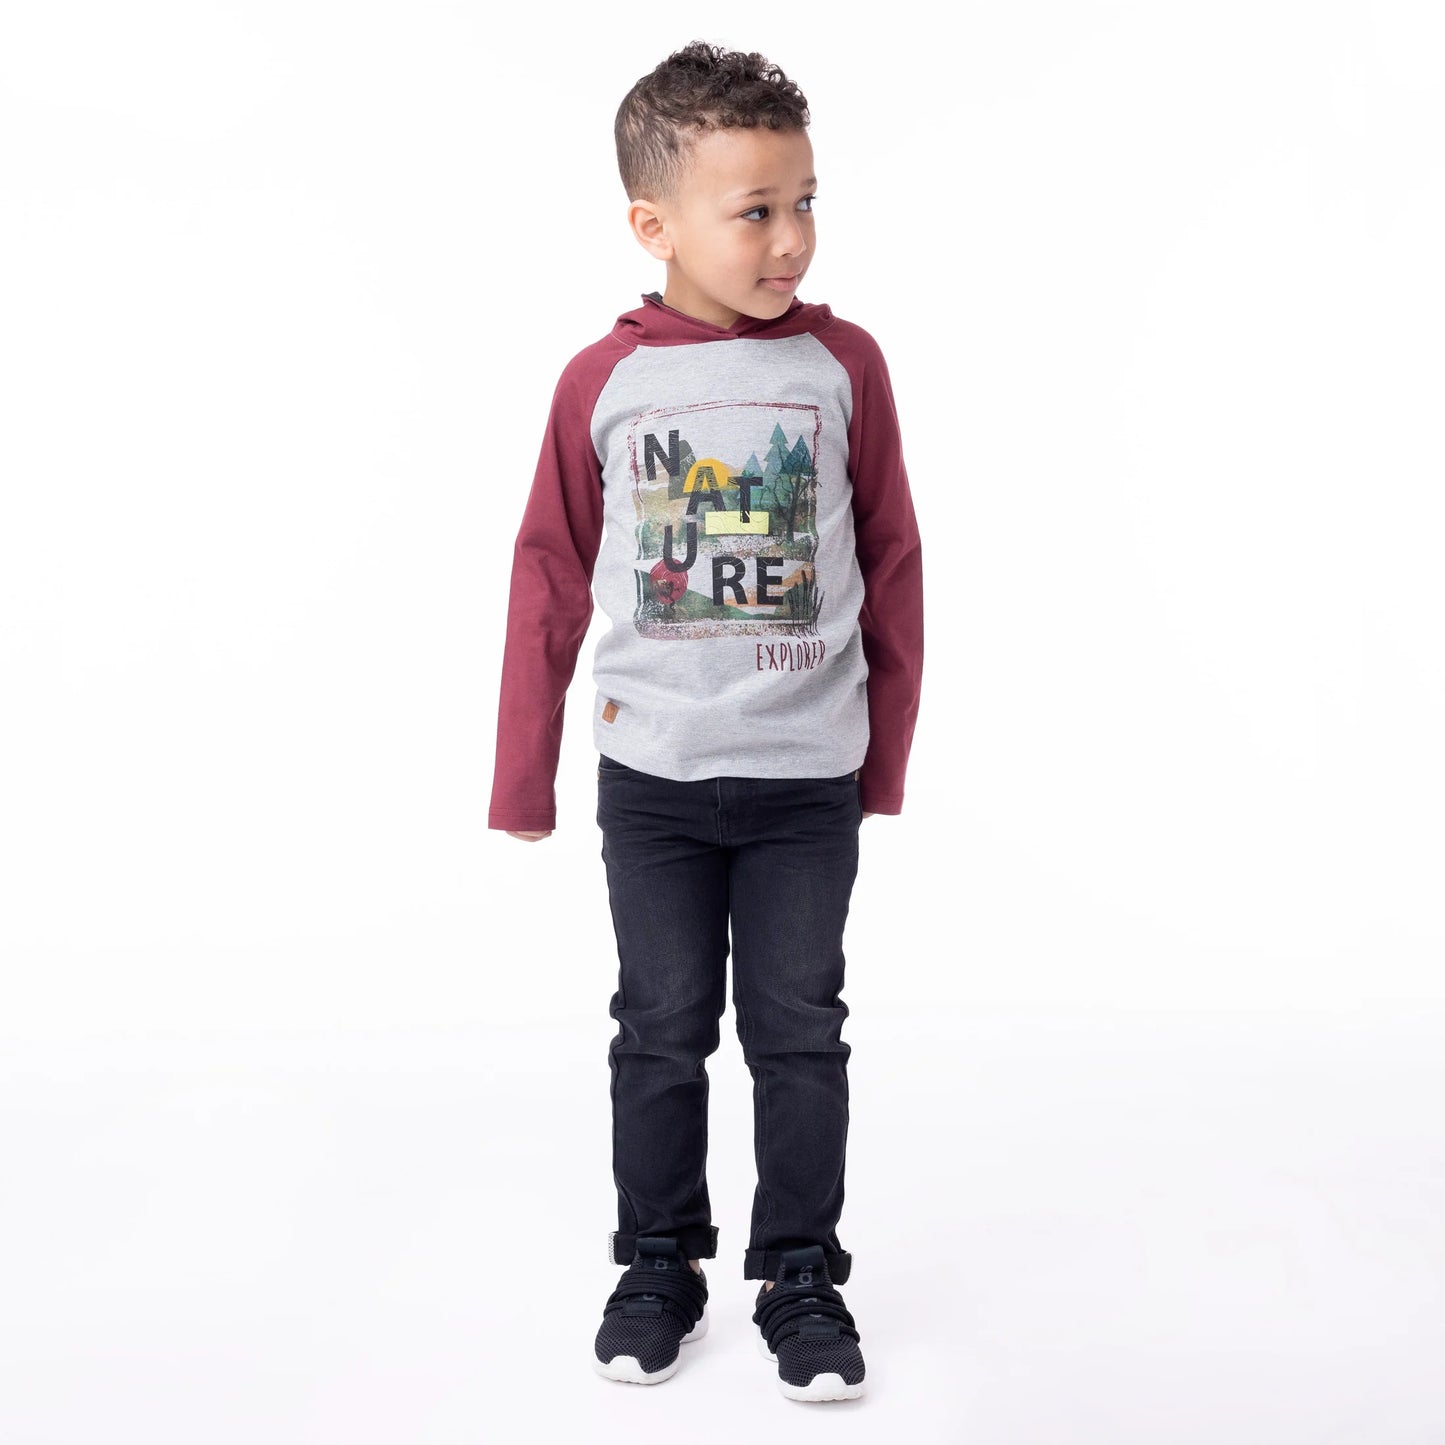 Long-sleeved Nanö hooded T-shirt for boys 2 to 6 years